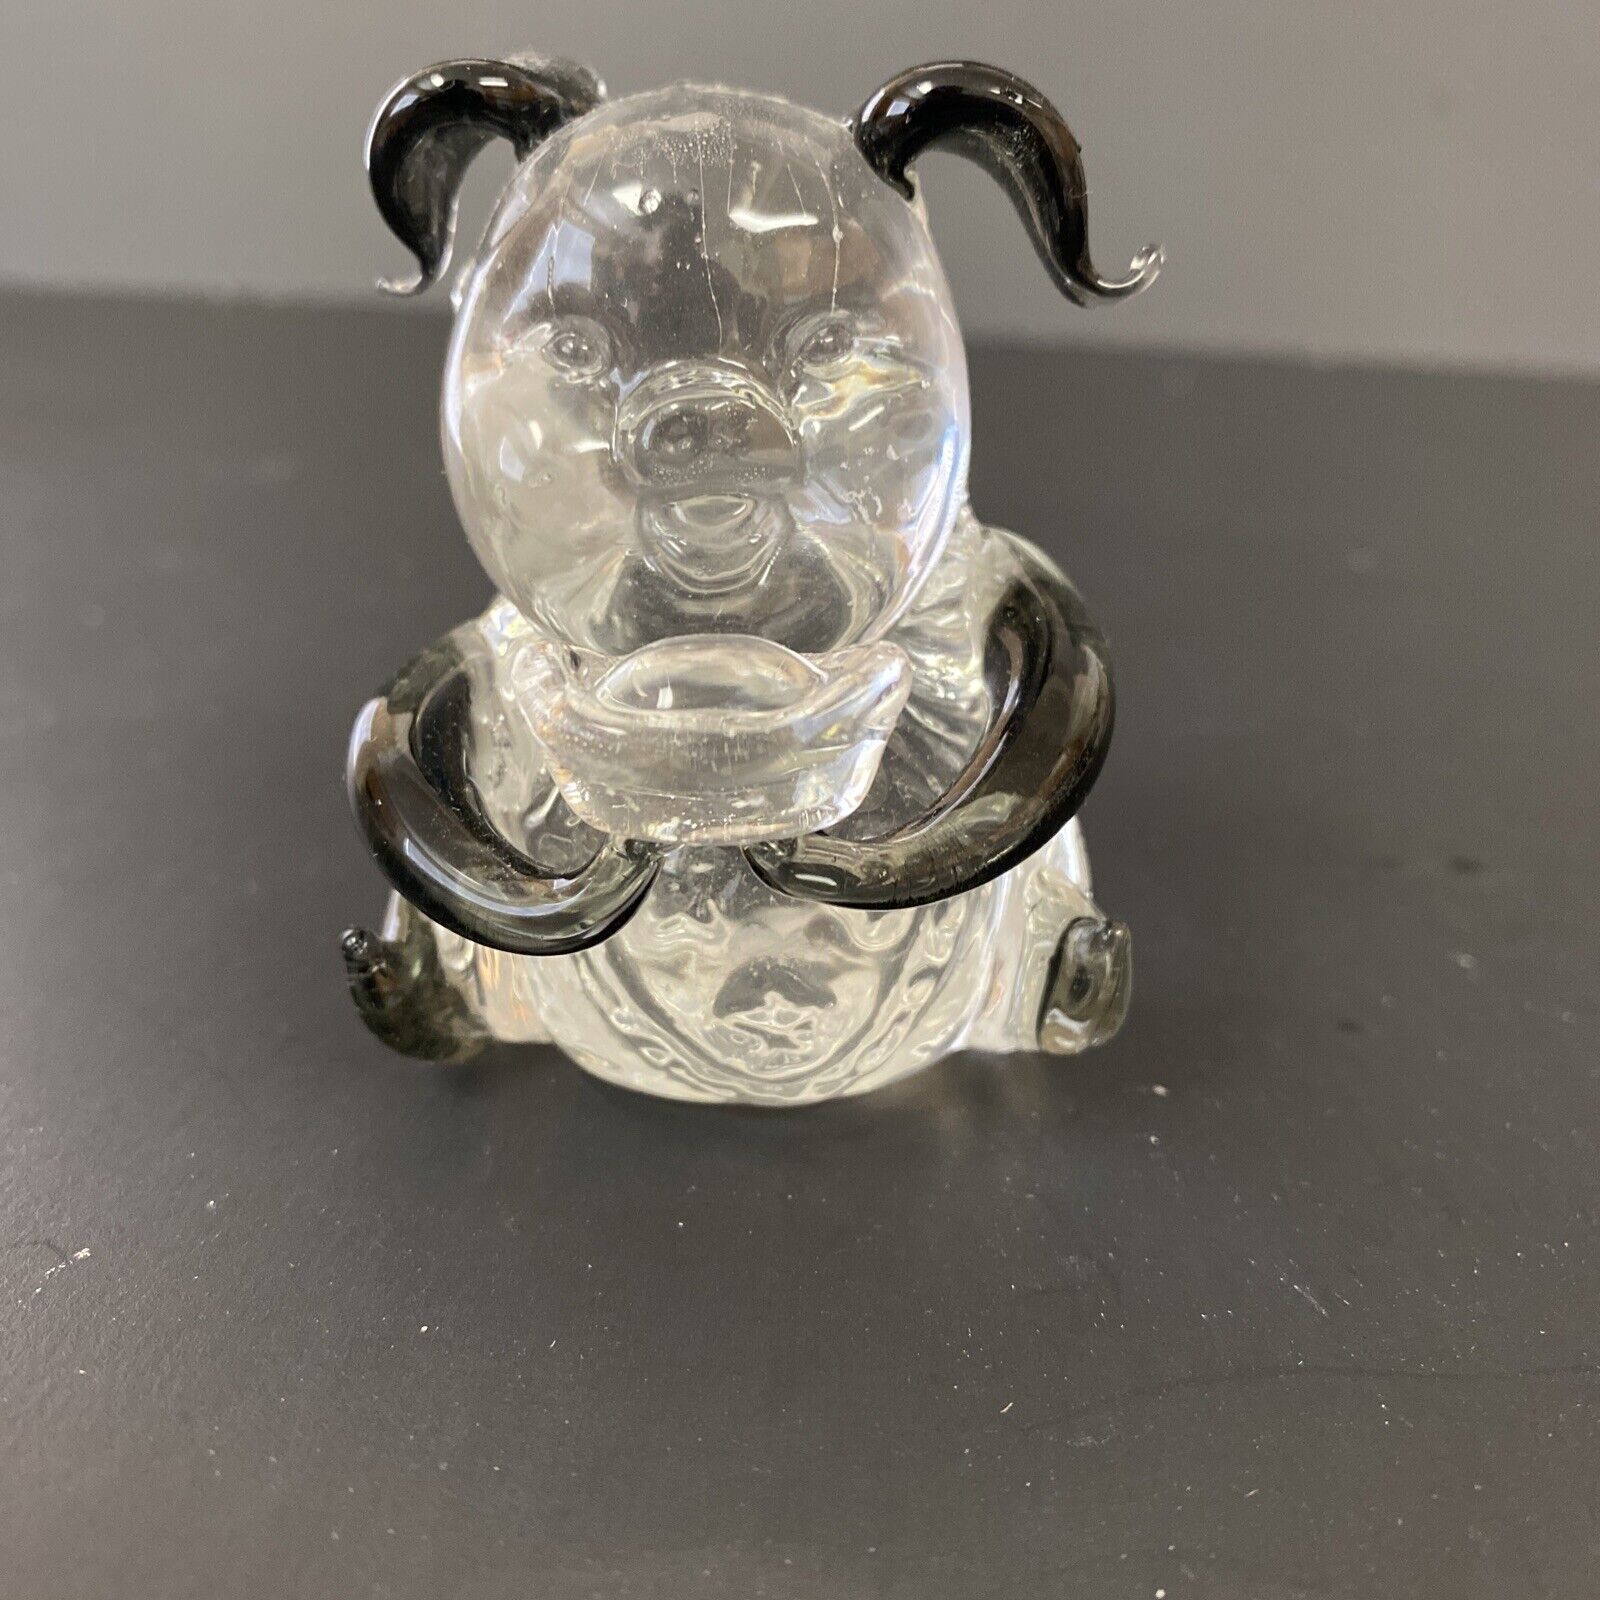 Miniature  Clear Glass Pig Figurine Black Ears and Arms 2-5/8” tall